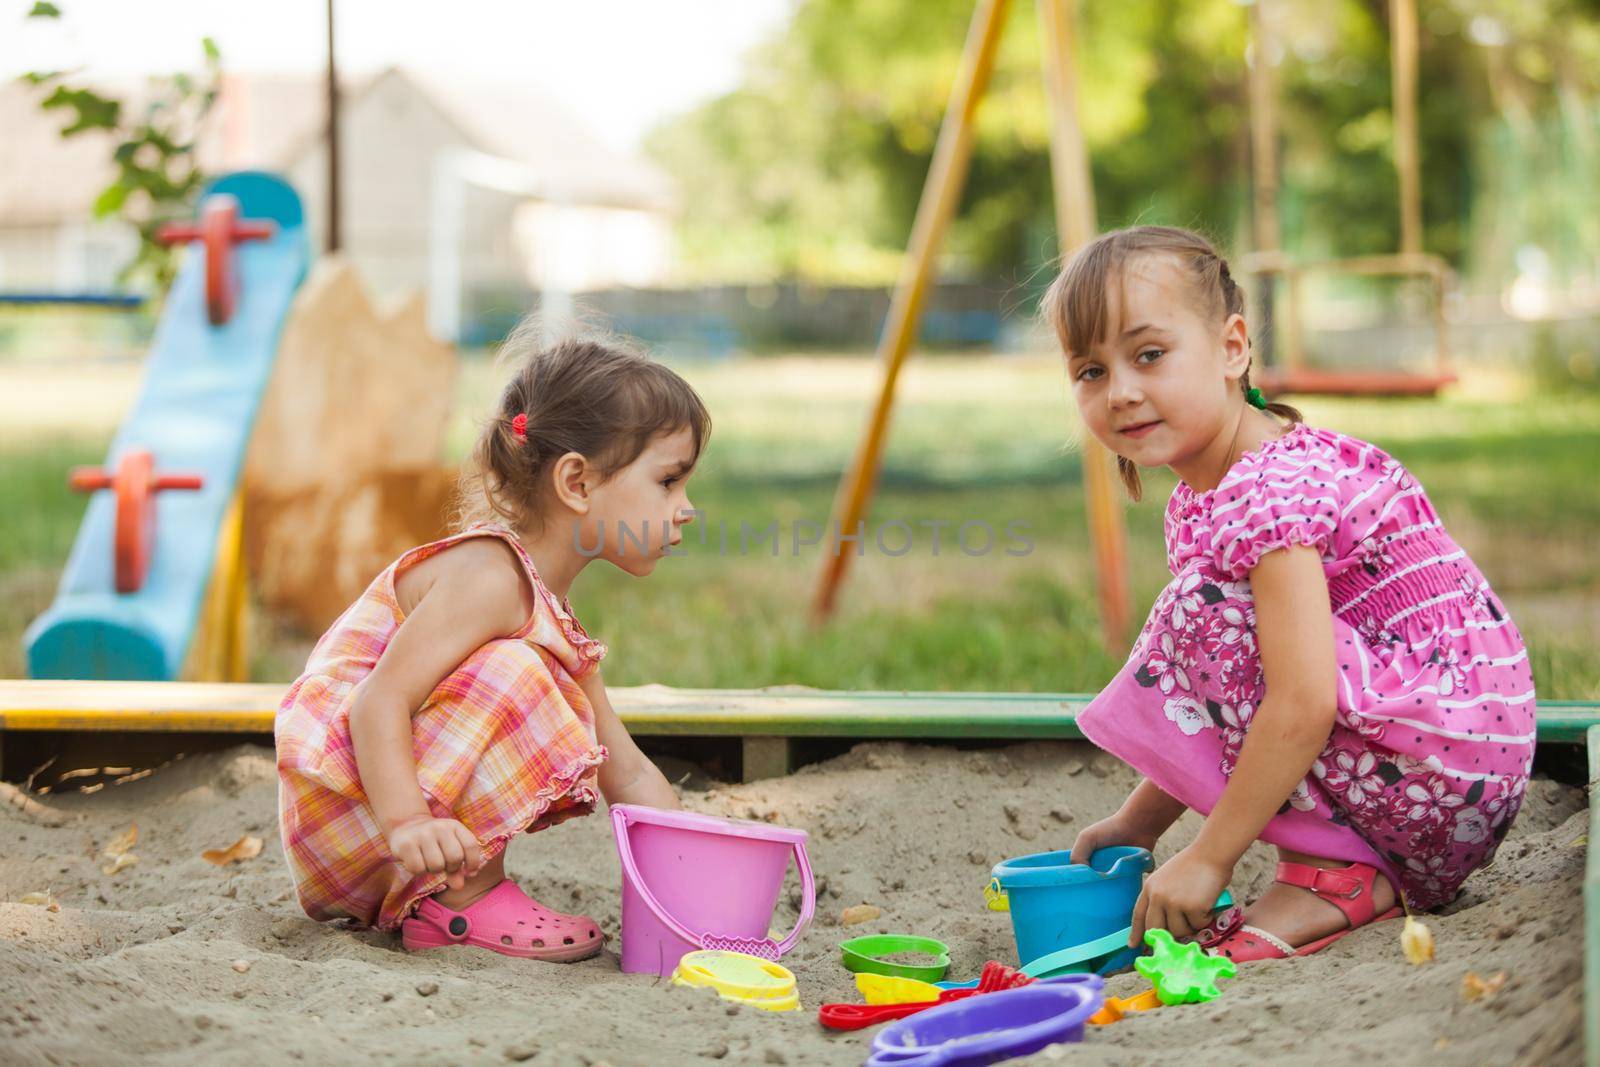 Two girls play in the sandbox at the playground